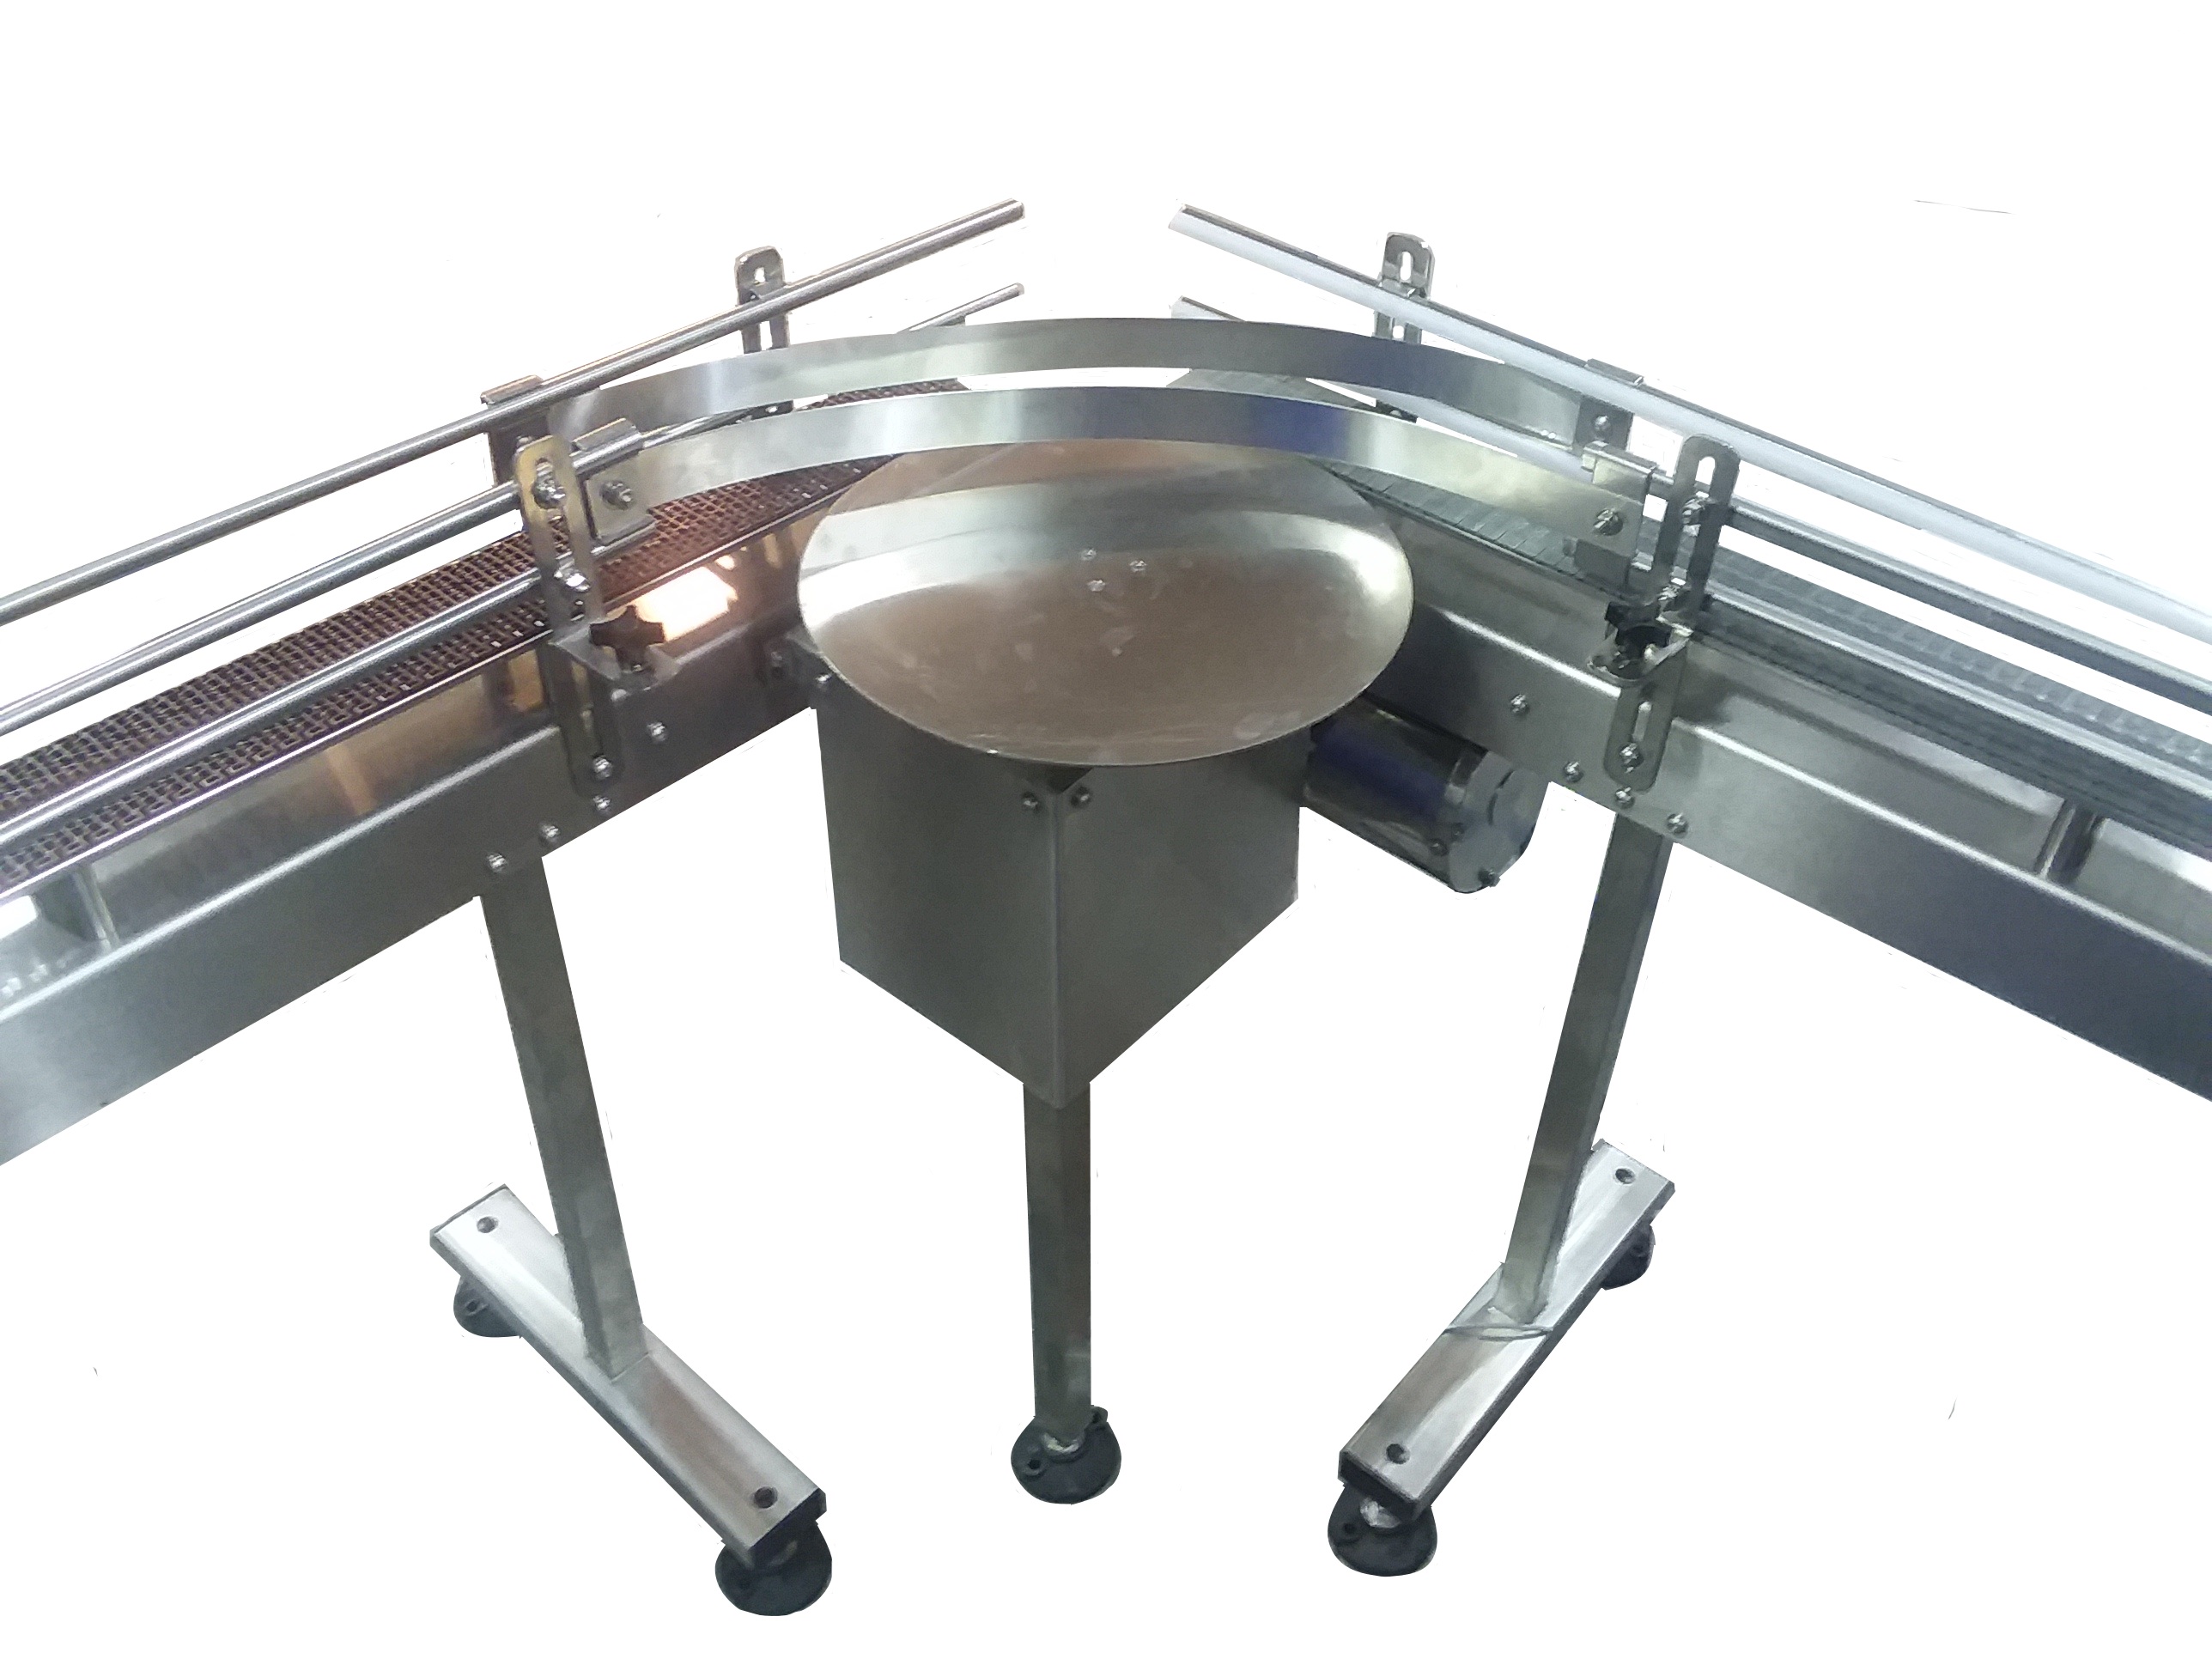 transfer turntable from Liquid Packaging Solutions